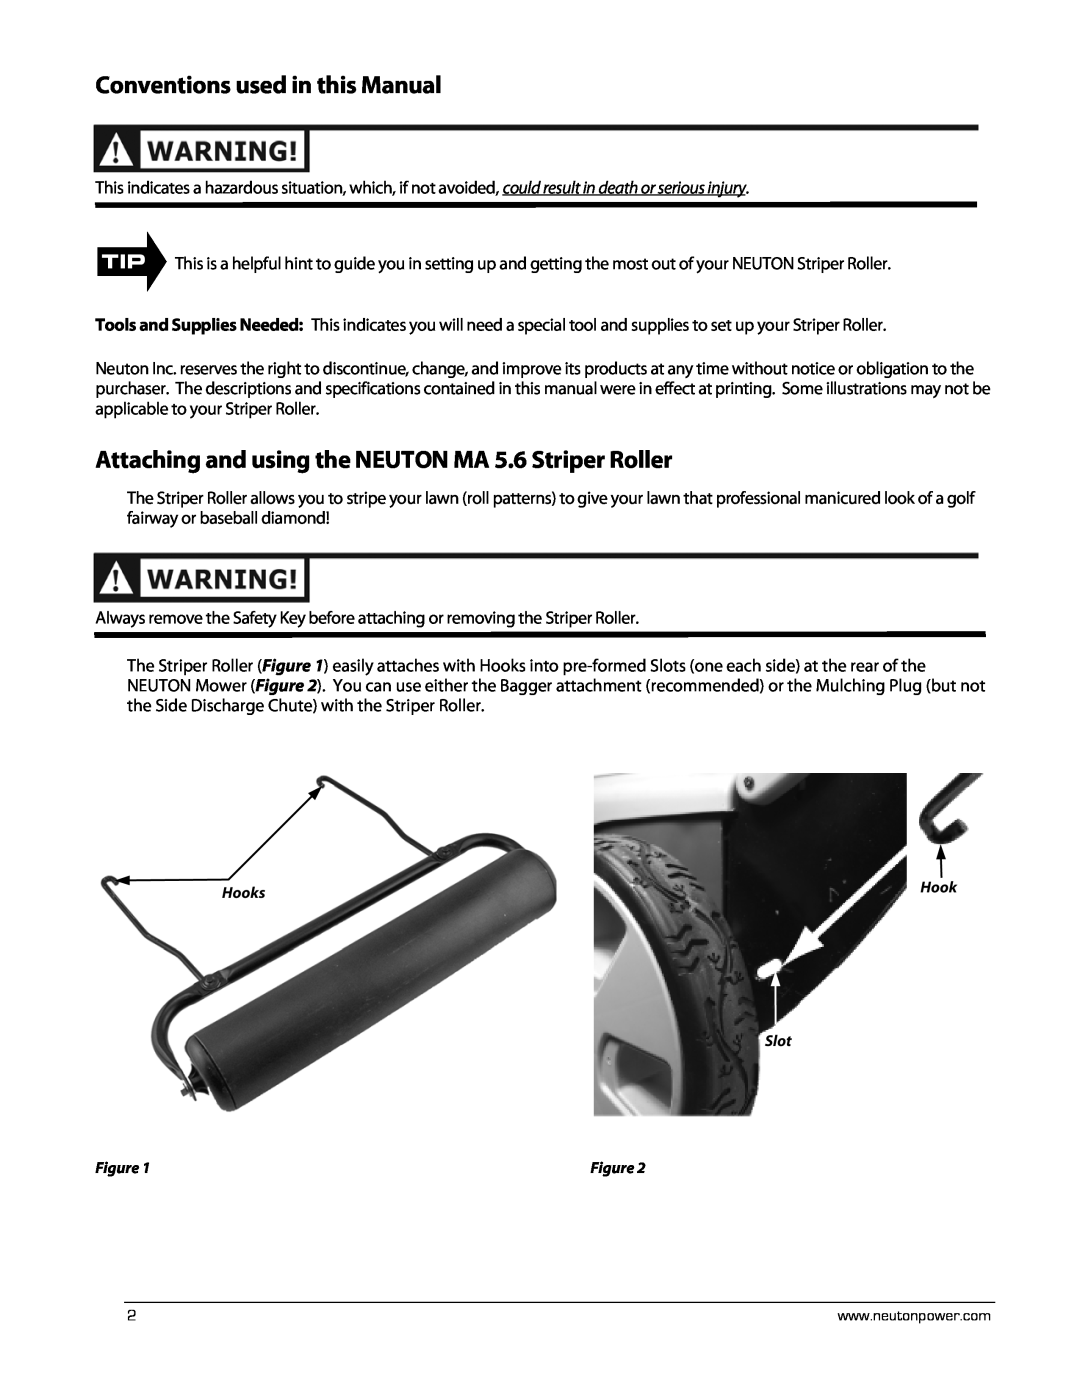 Neuton MA 5.6 operating instructions Conventions used in this Manual, Hooks, Slot 